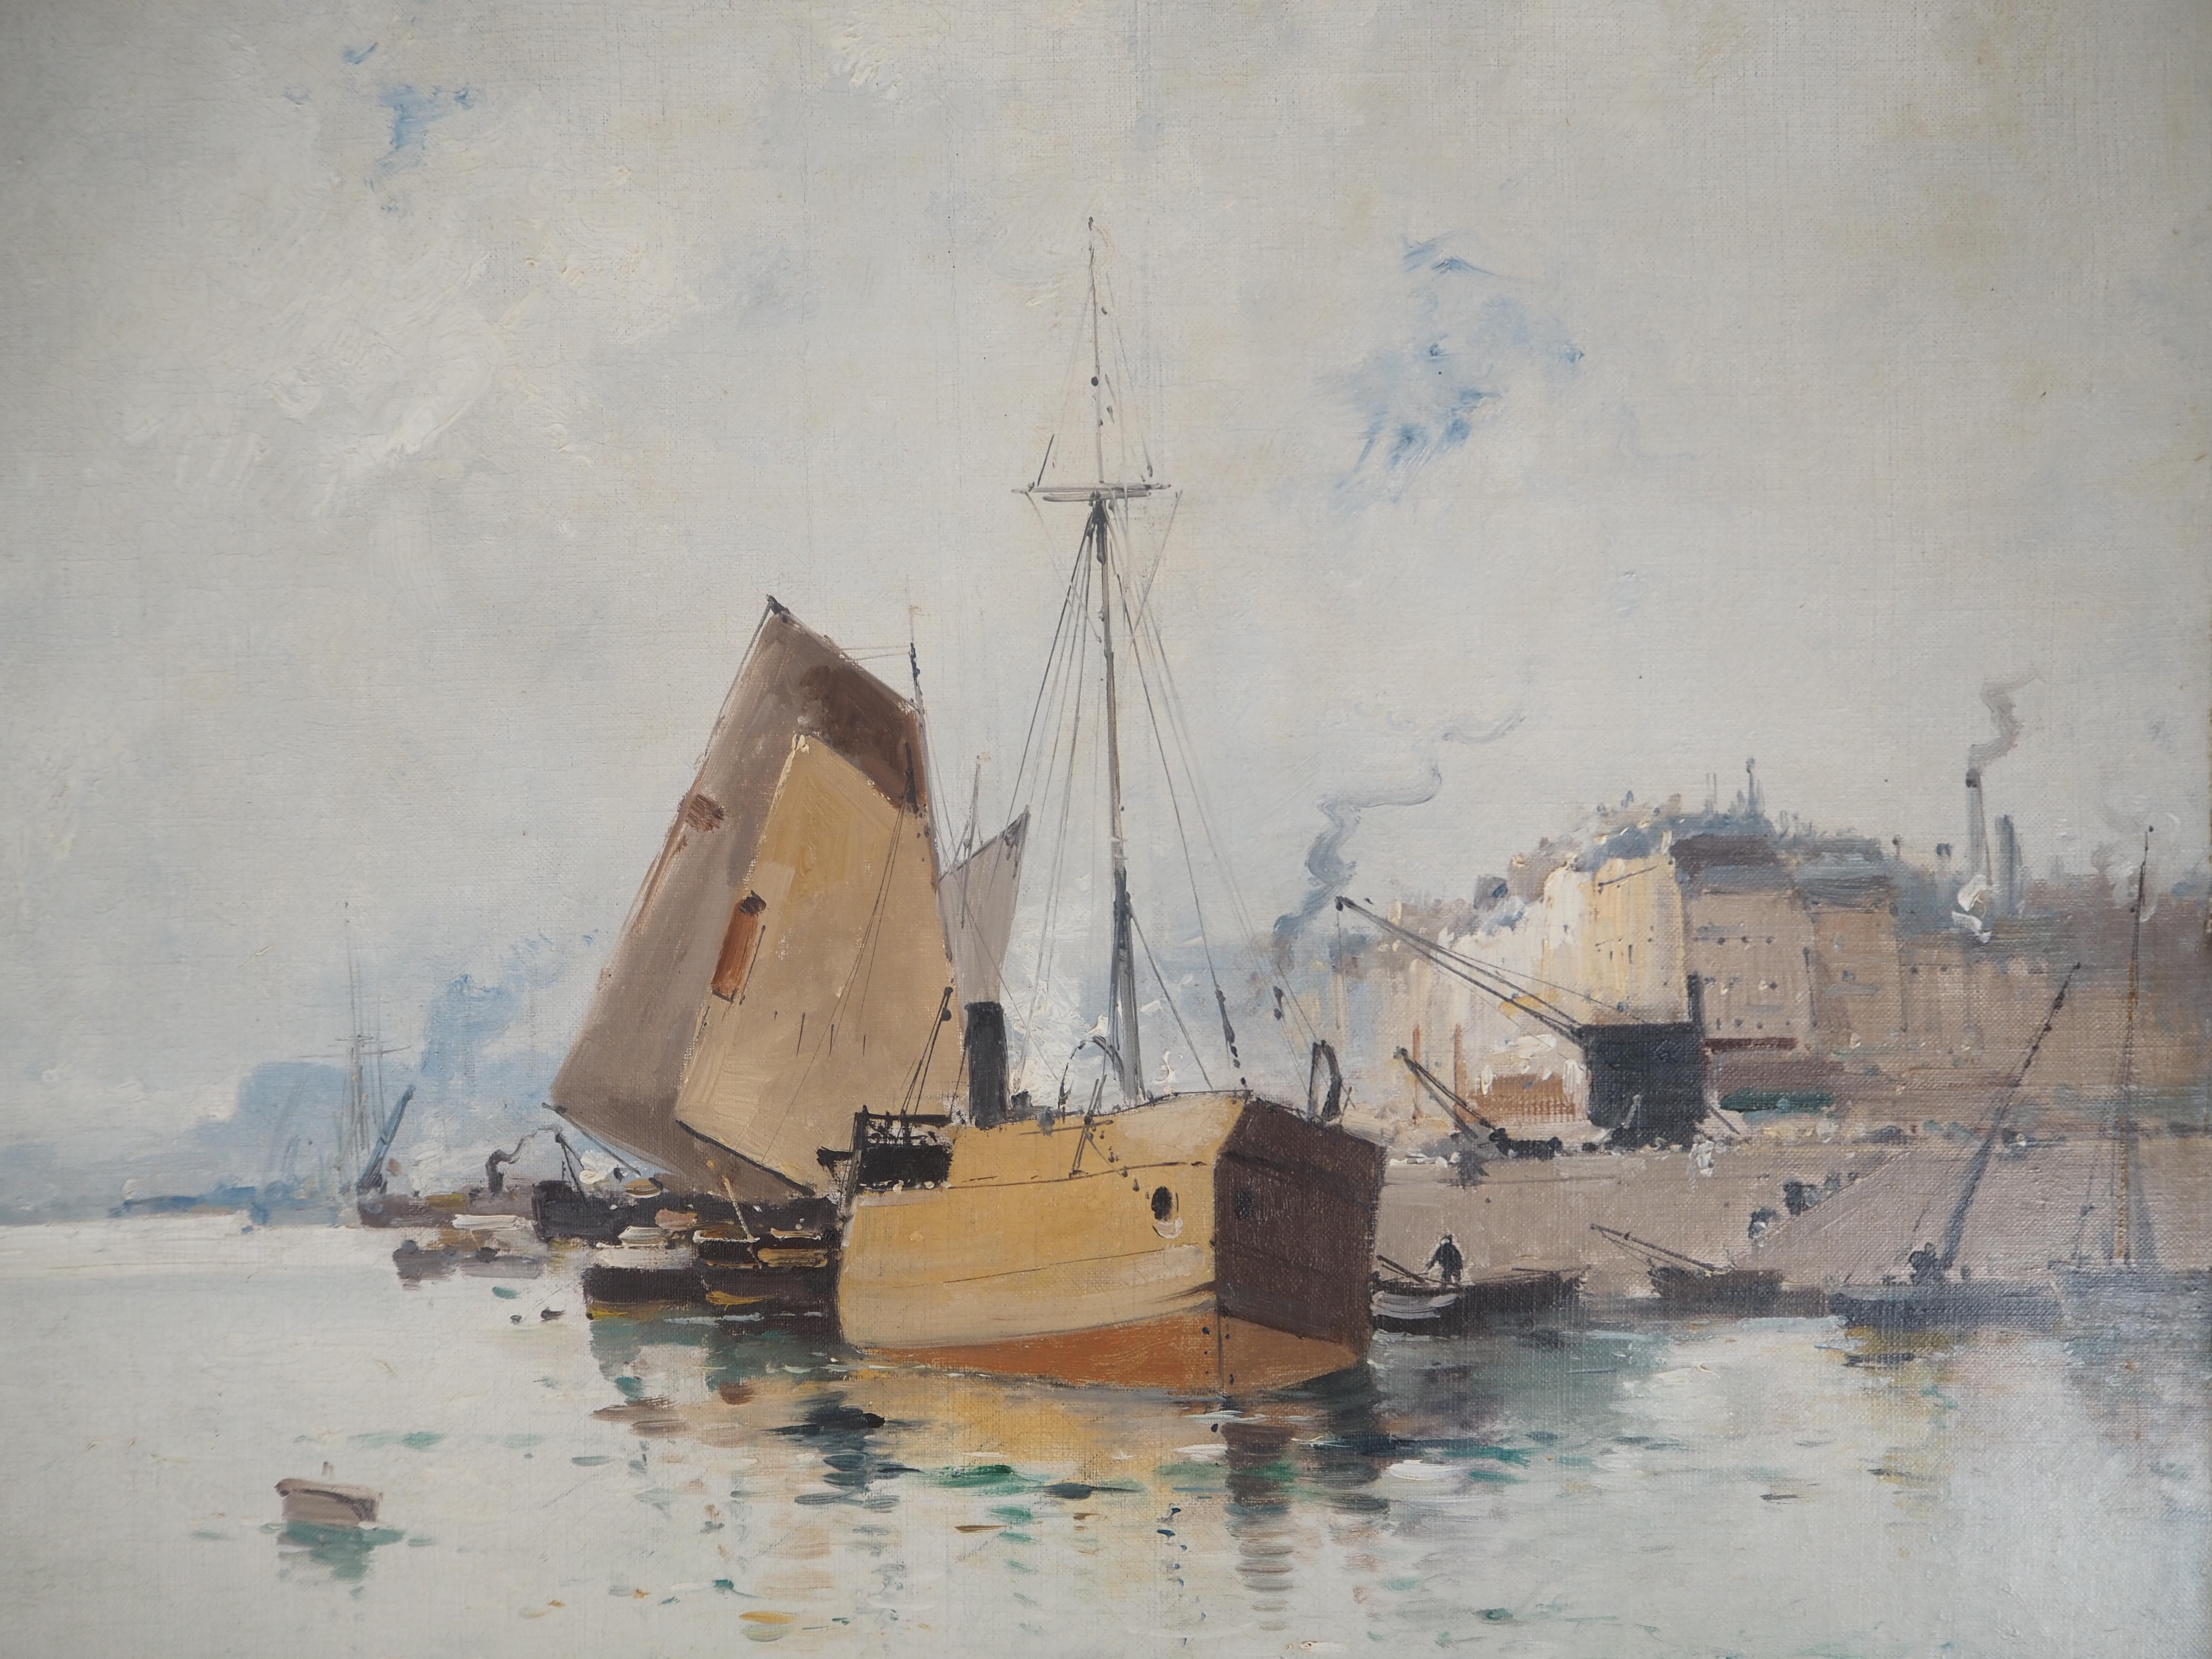 Boats Leaving the Harbor - Original painting on canvas - Signed - Black Landscape Painting by Eugene Galien-Laloue